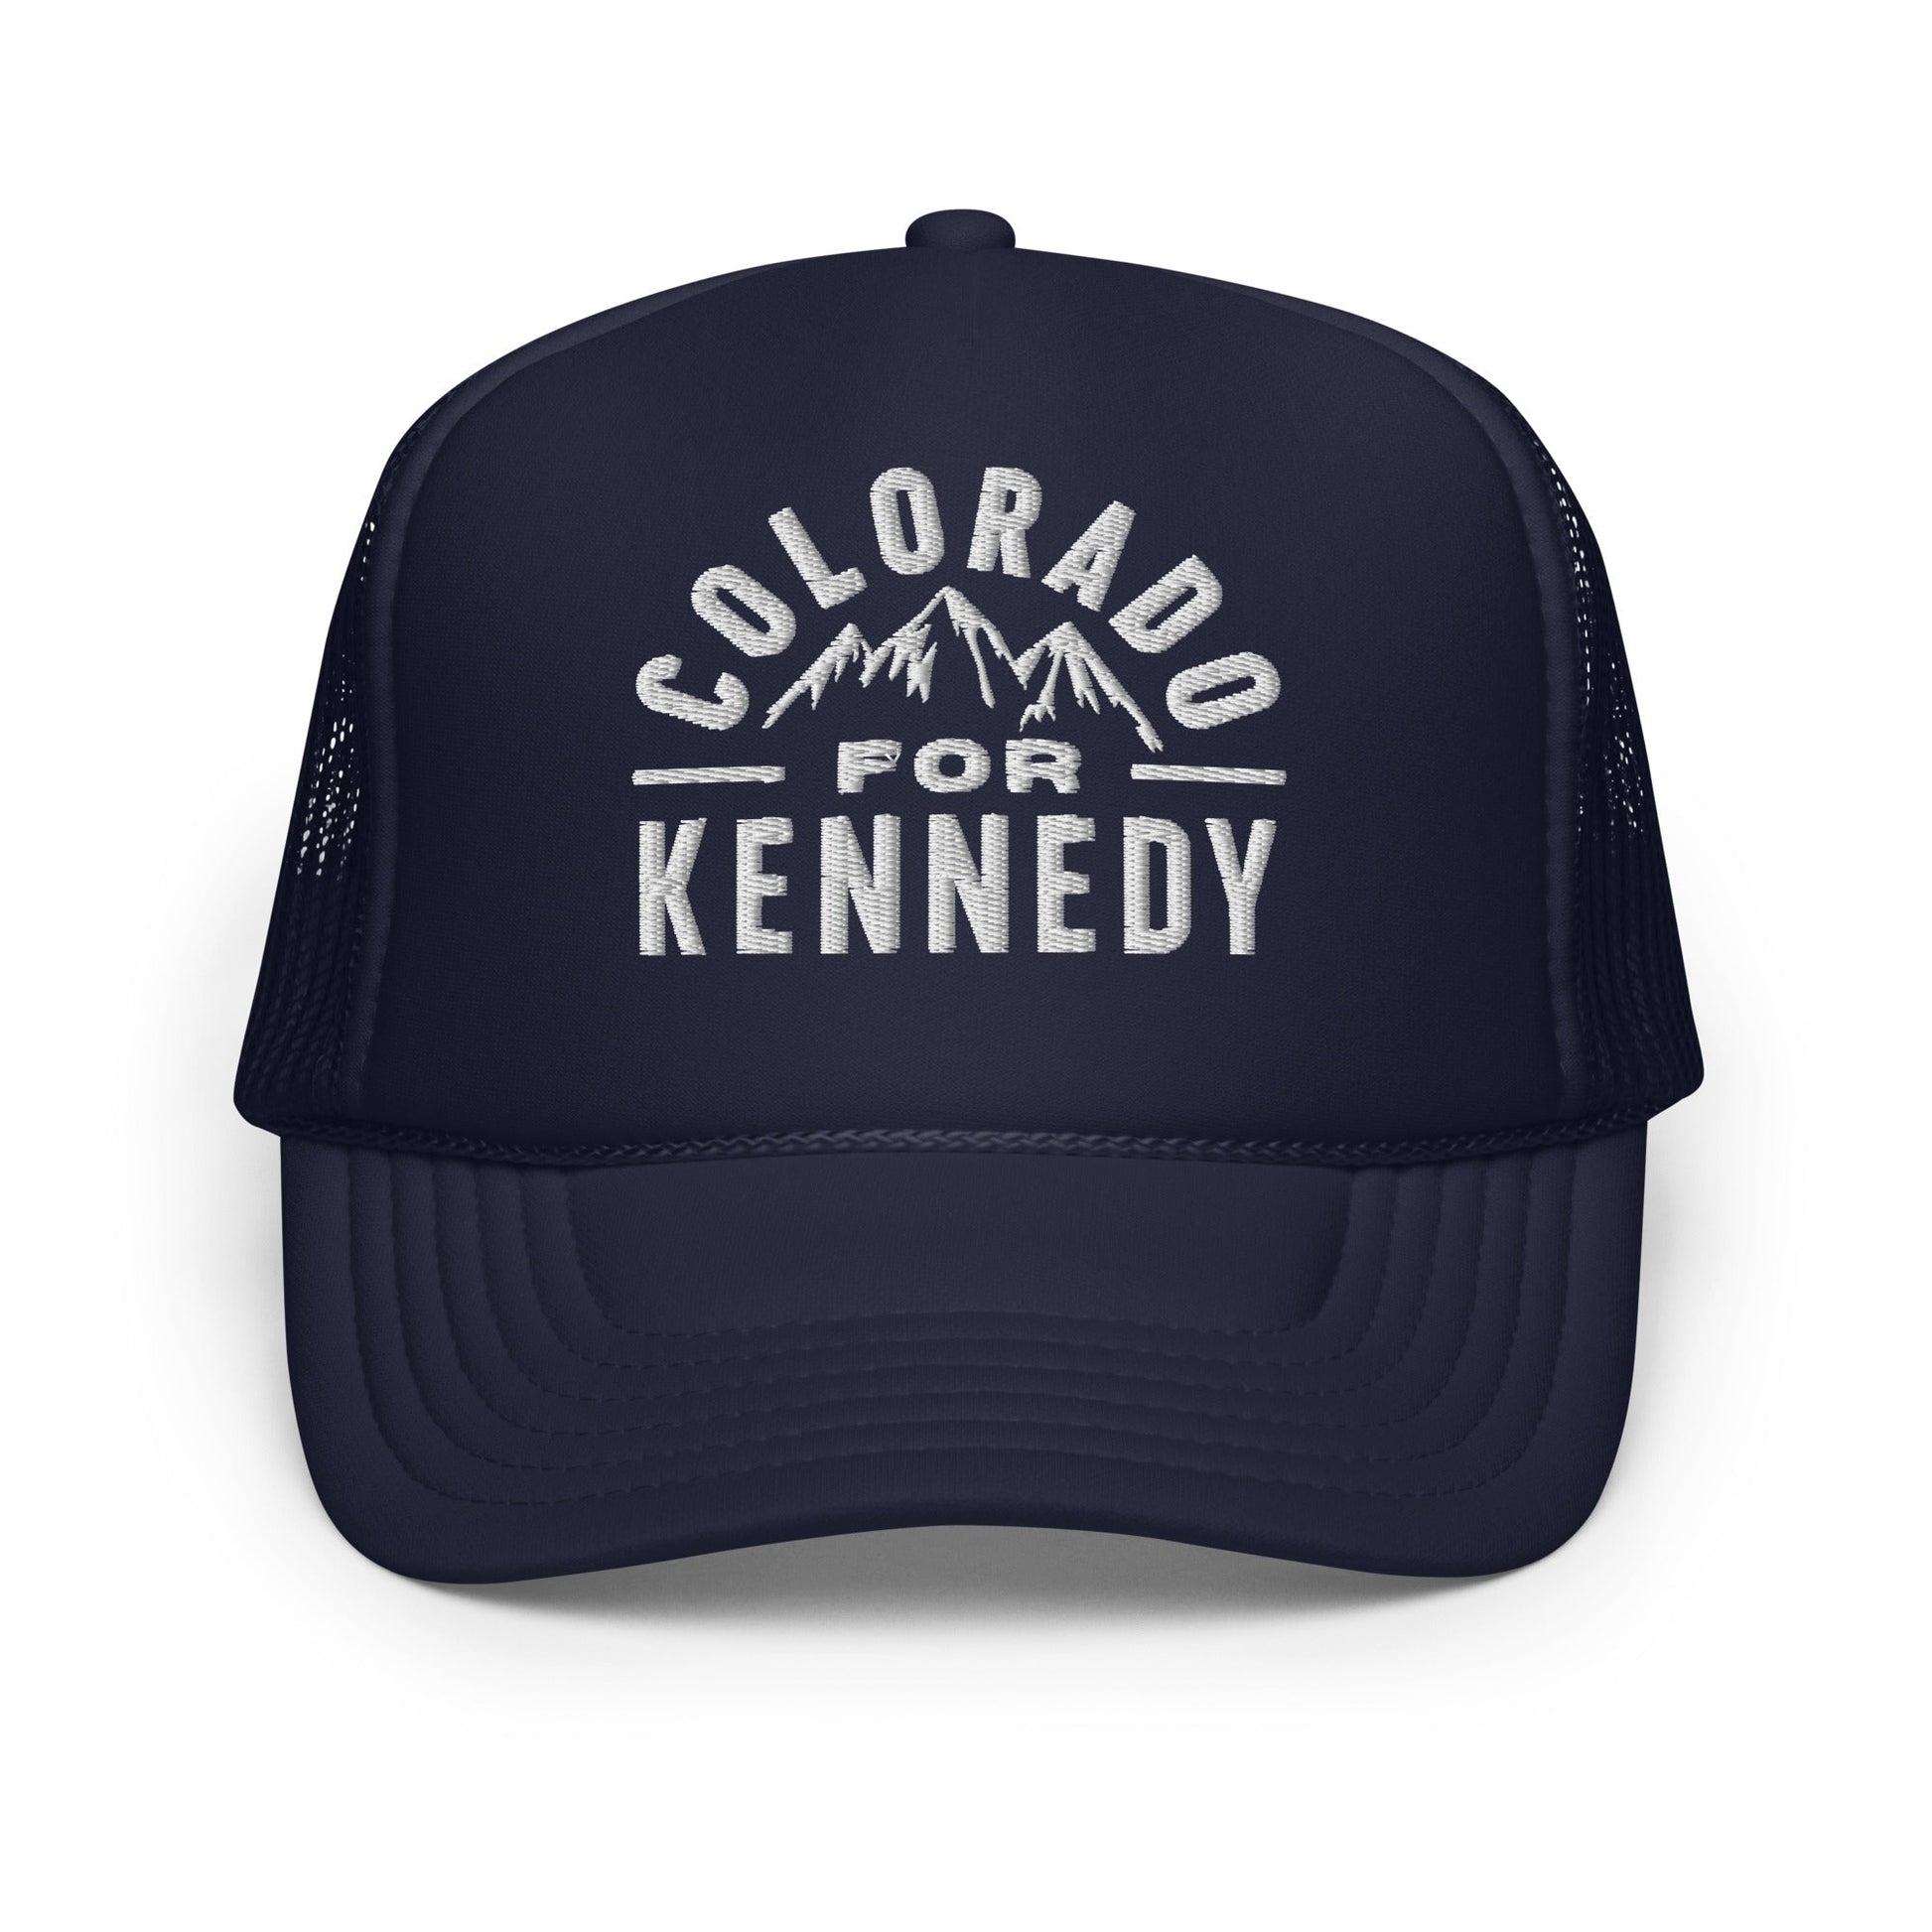 Colorado for Kennedy Foam Trucker Hat - TEAM KENNEDY. All rights reserved